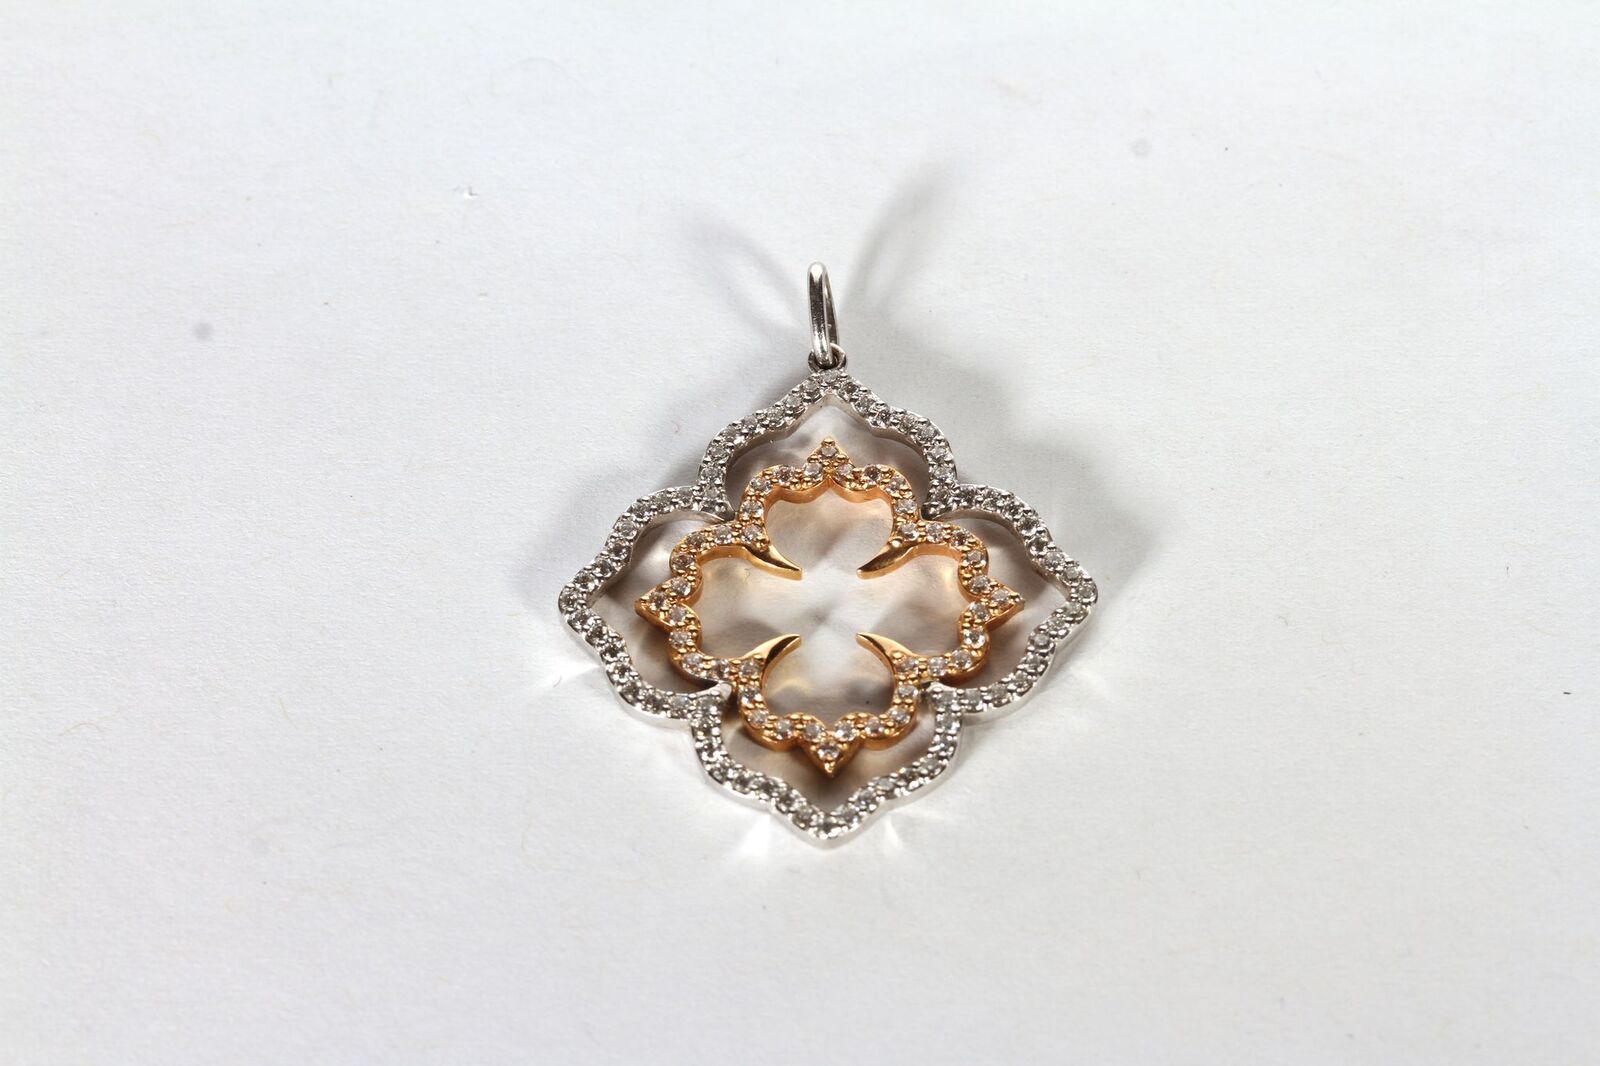 8CT WHITE GOLD AND ROSE GOLD FLOWER PENDANT, SET WITH AN ESTIMATED 0.75CT OF DIAMONDS, dimensions